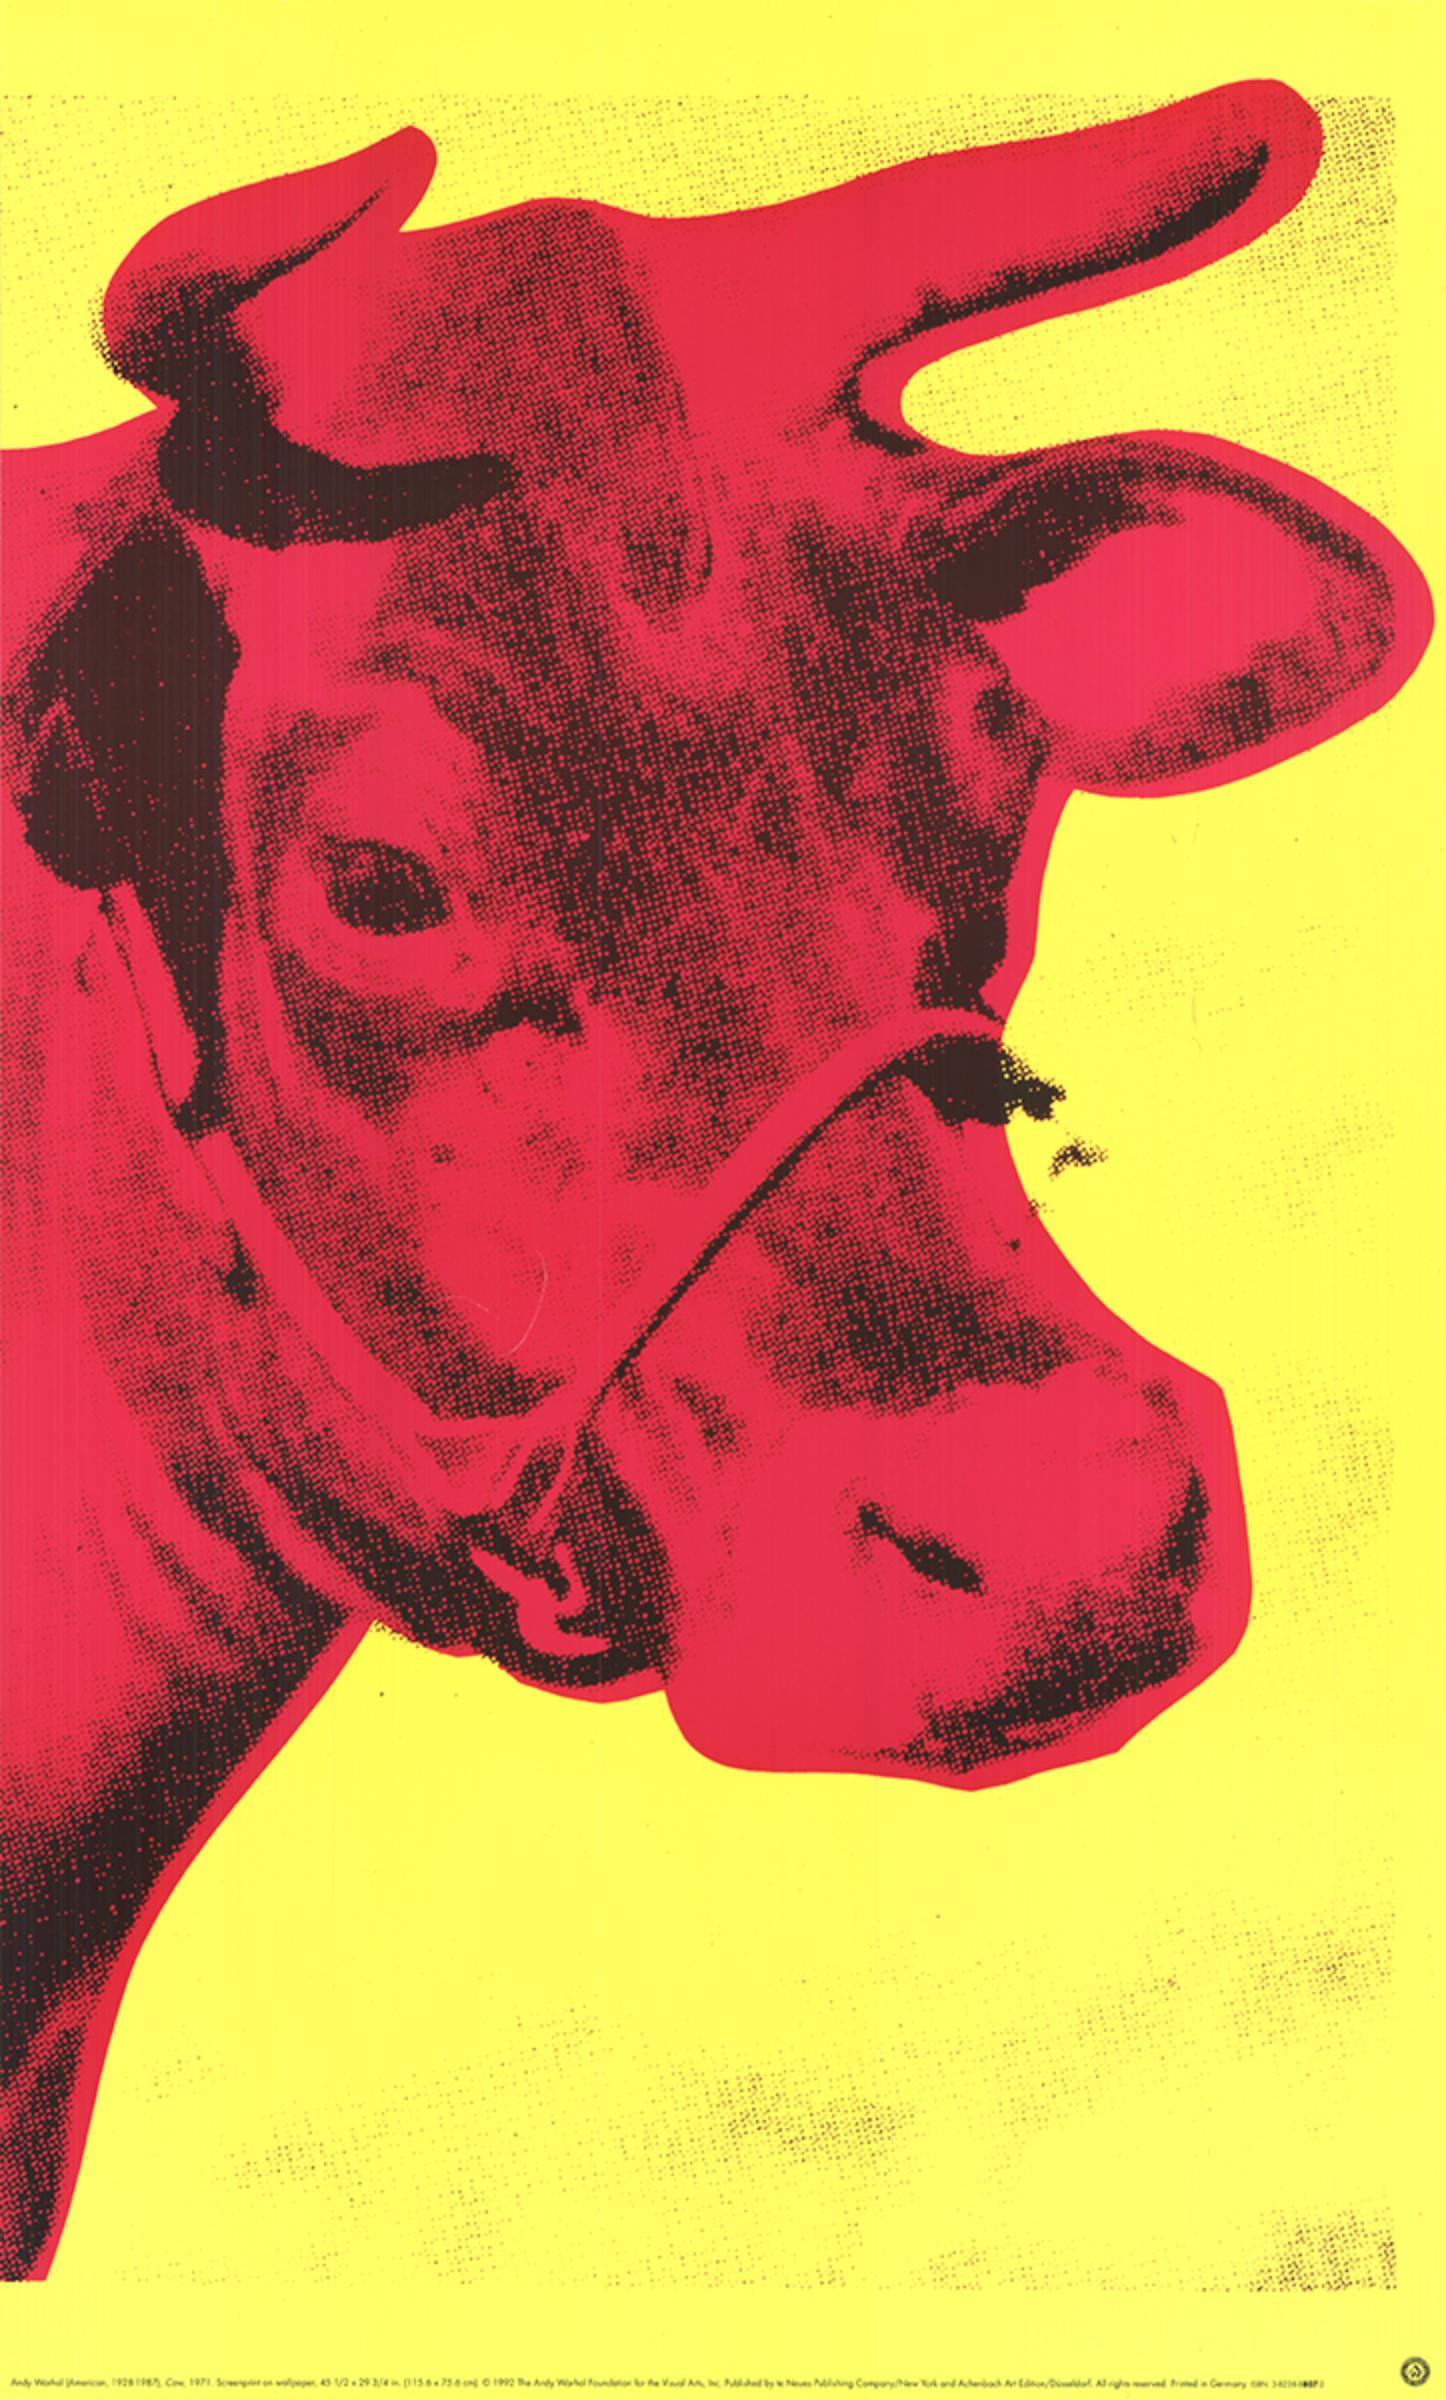 Paper Size: 33.5 x 21 inches ( 85.09 x 53.34 cm )
Image Size: 33.5 x 21 inches ( 85.09 x 53.34 cm )
Framed: No
Condition: A: Mint

Additional Details: Poster based after Warhol's 1971 original screenprint "Cow." Published by te Neues Publishing